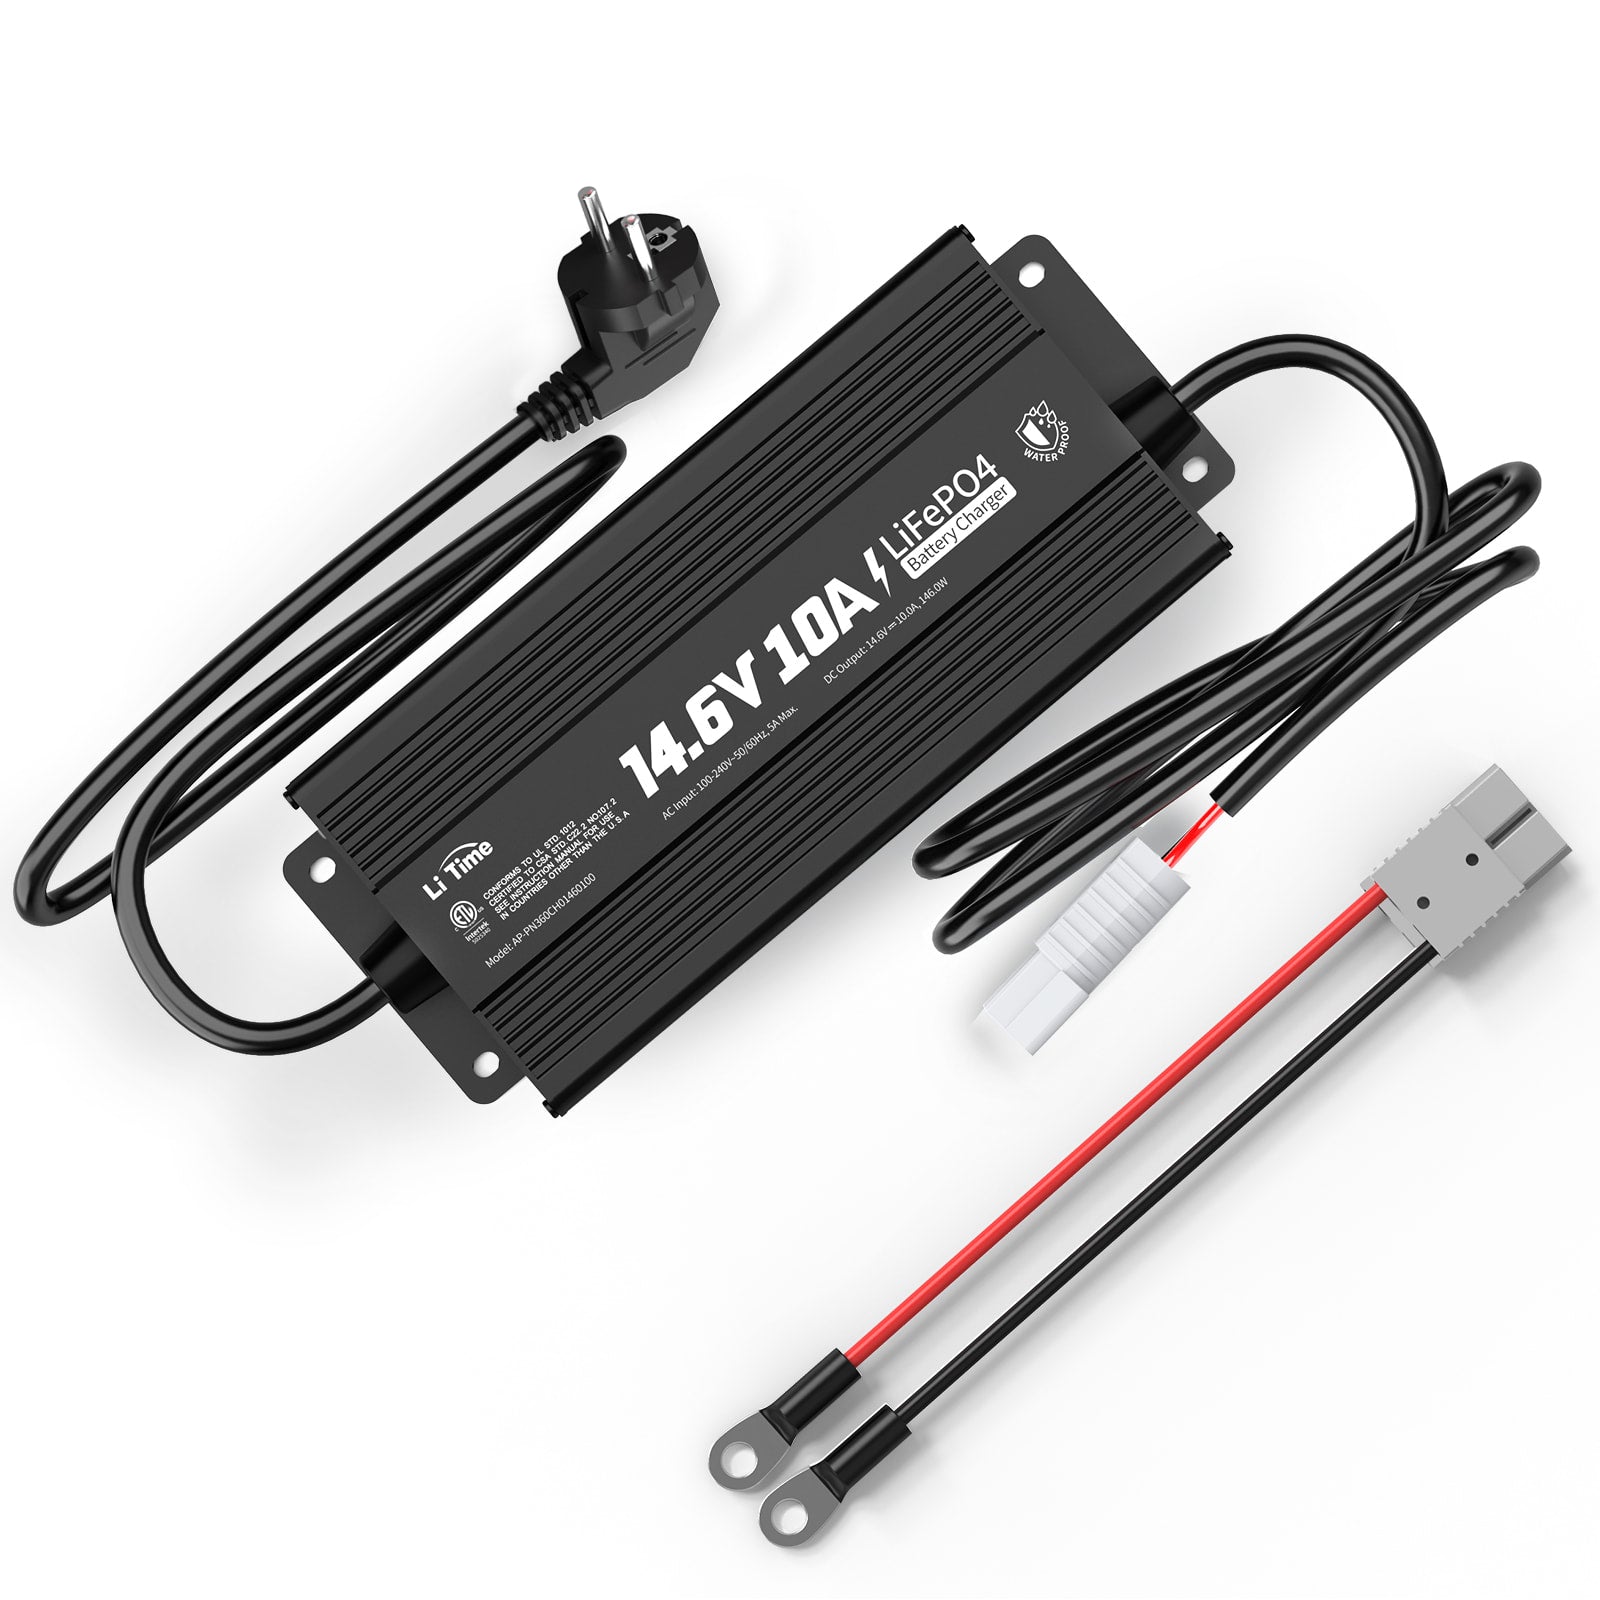 LiTime 14.6V 10A lithium battery charger for 12V LiFePO4 lithium battery